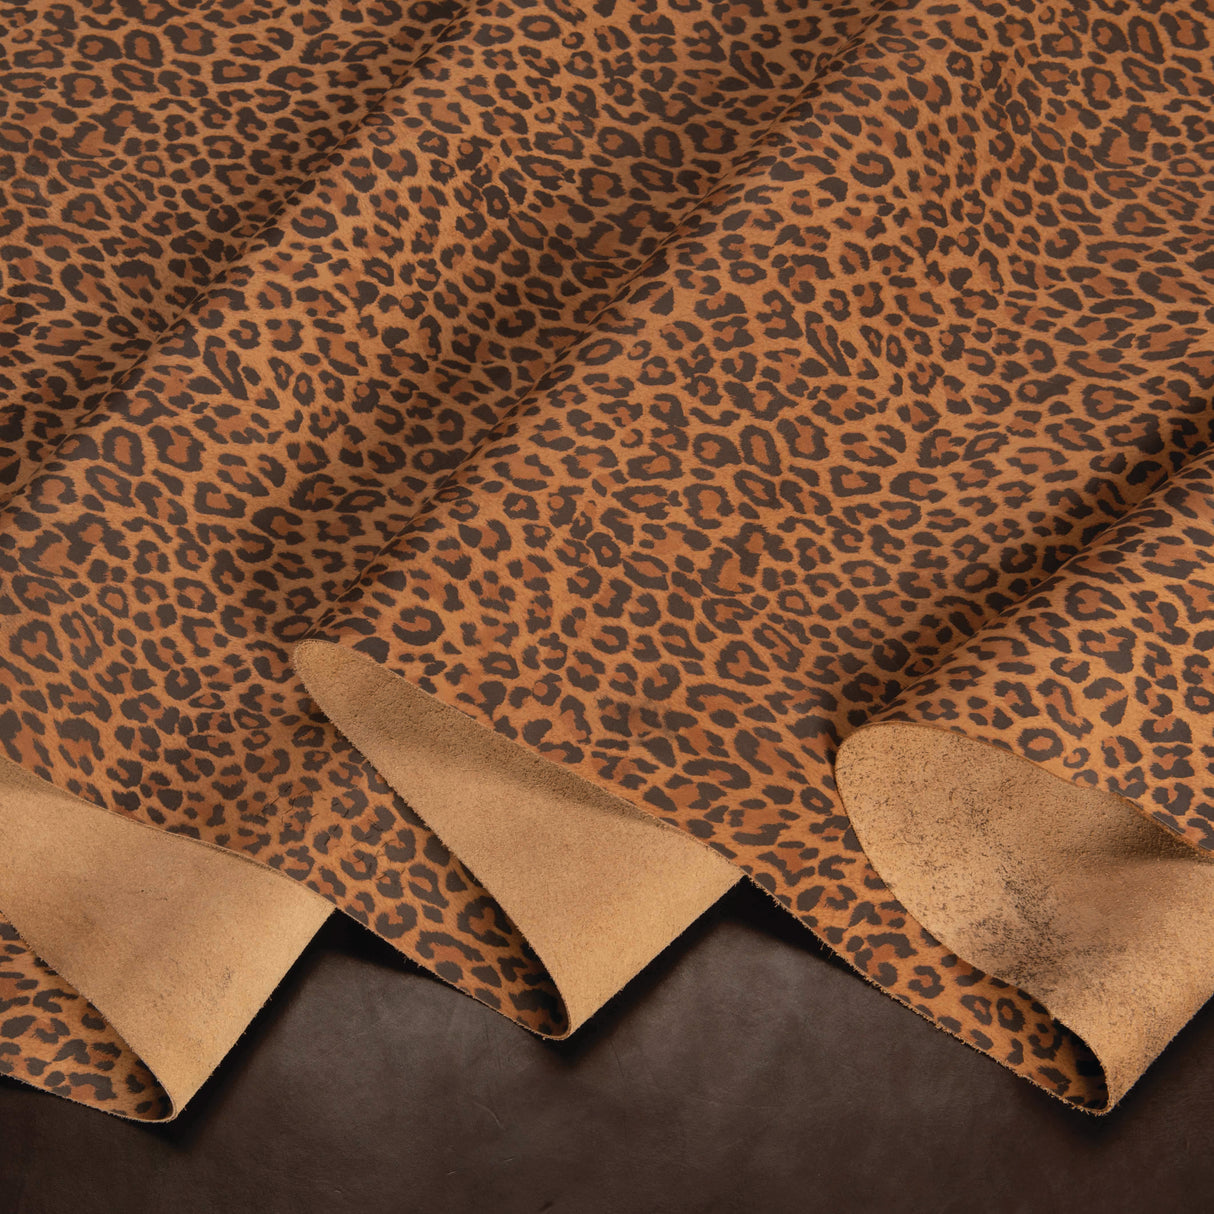 Leopard Printed Leather, 3-4 oz.